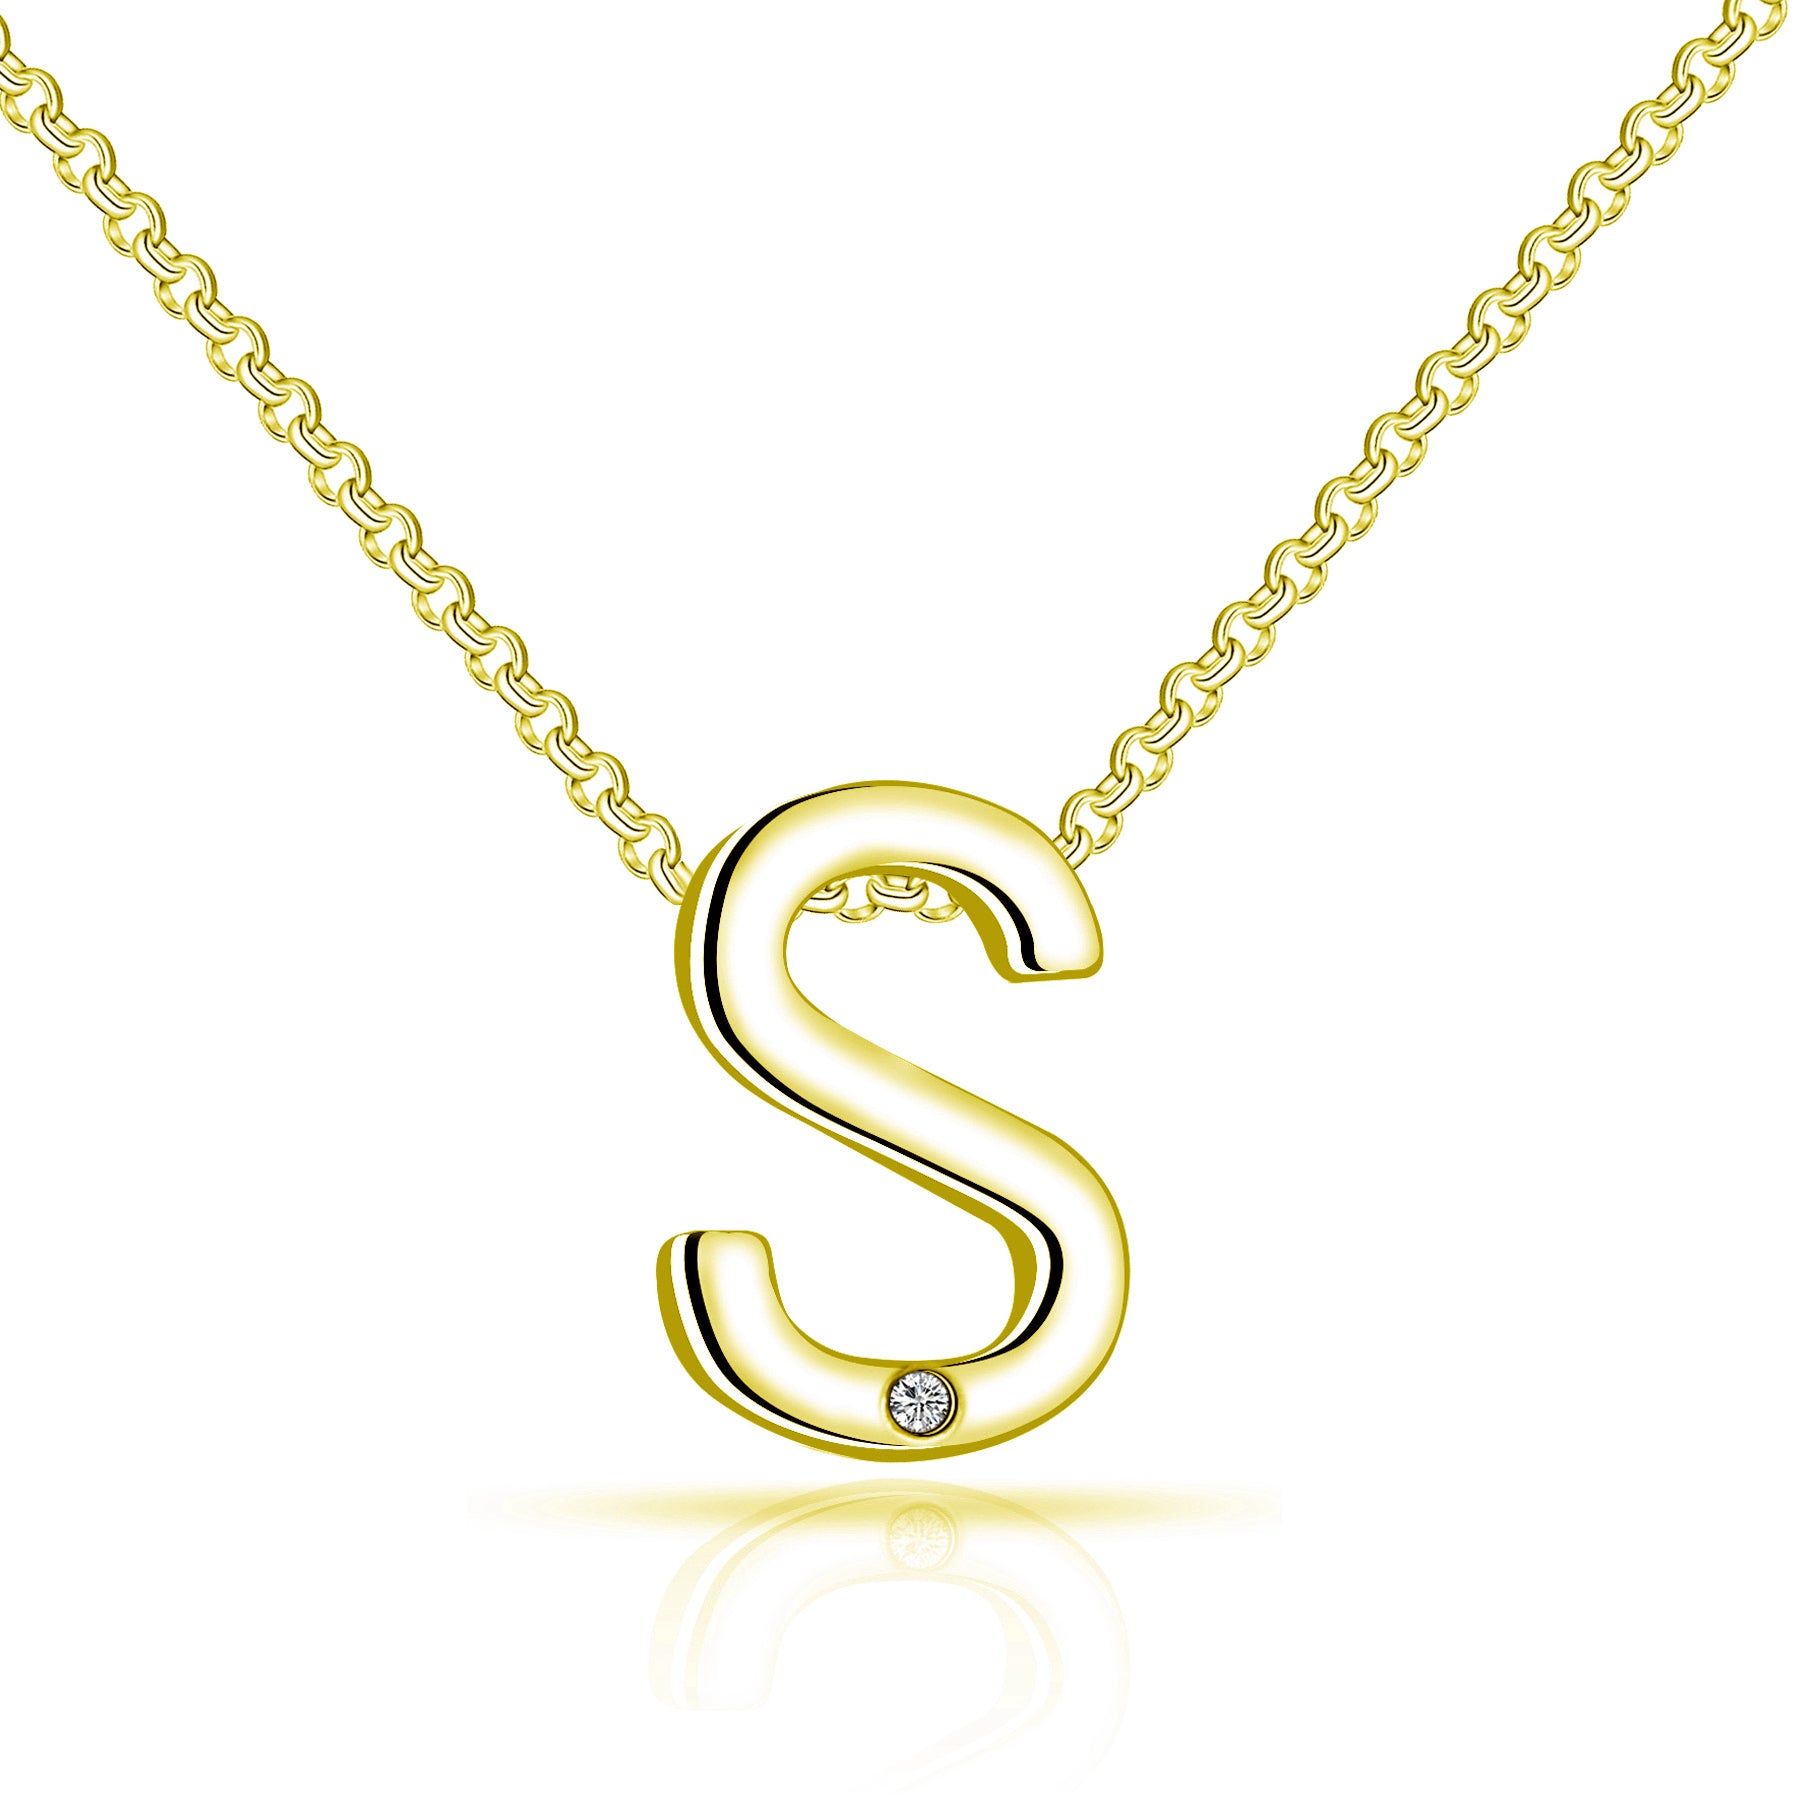 Gold Plated Initial Necklace Letter S Created with Zircondia® Crystals by Philip Jones Jewellery